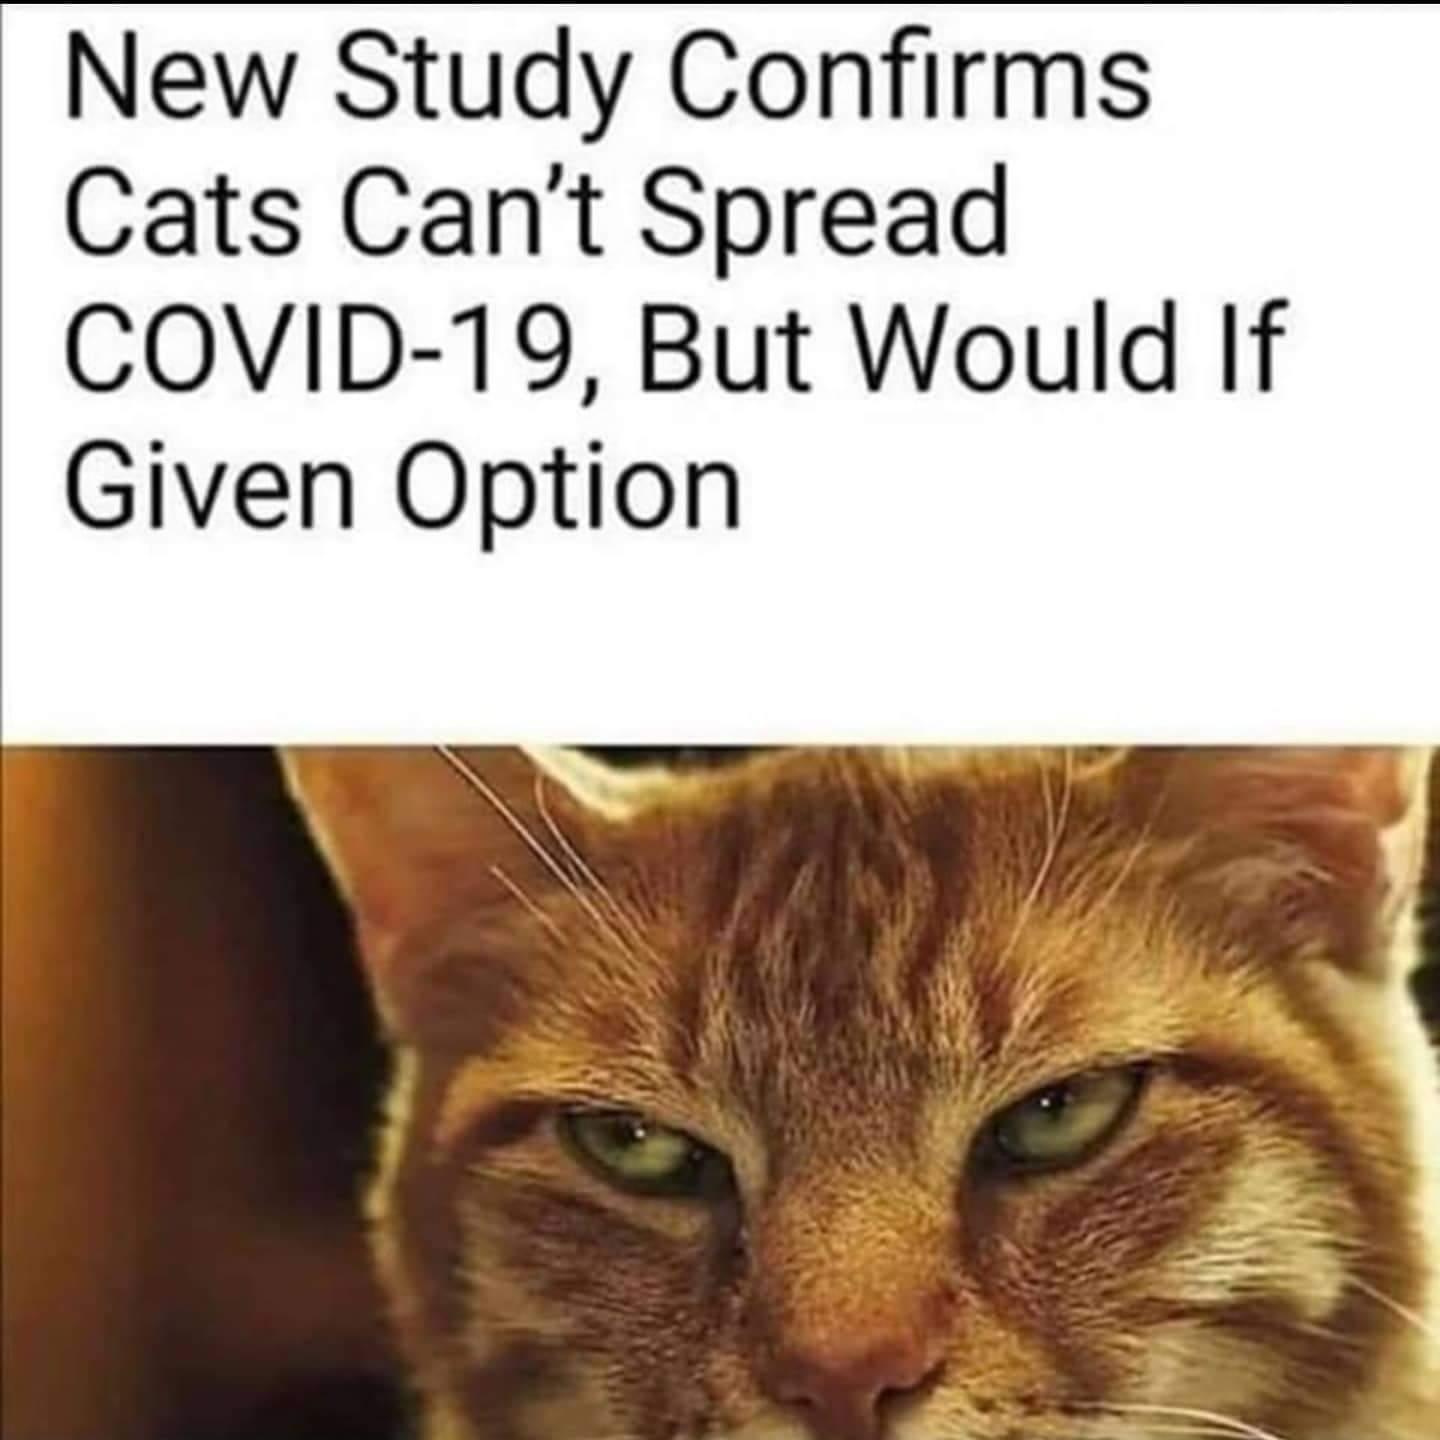 cats_cant_spread_covid.jpg